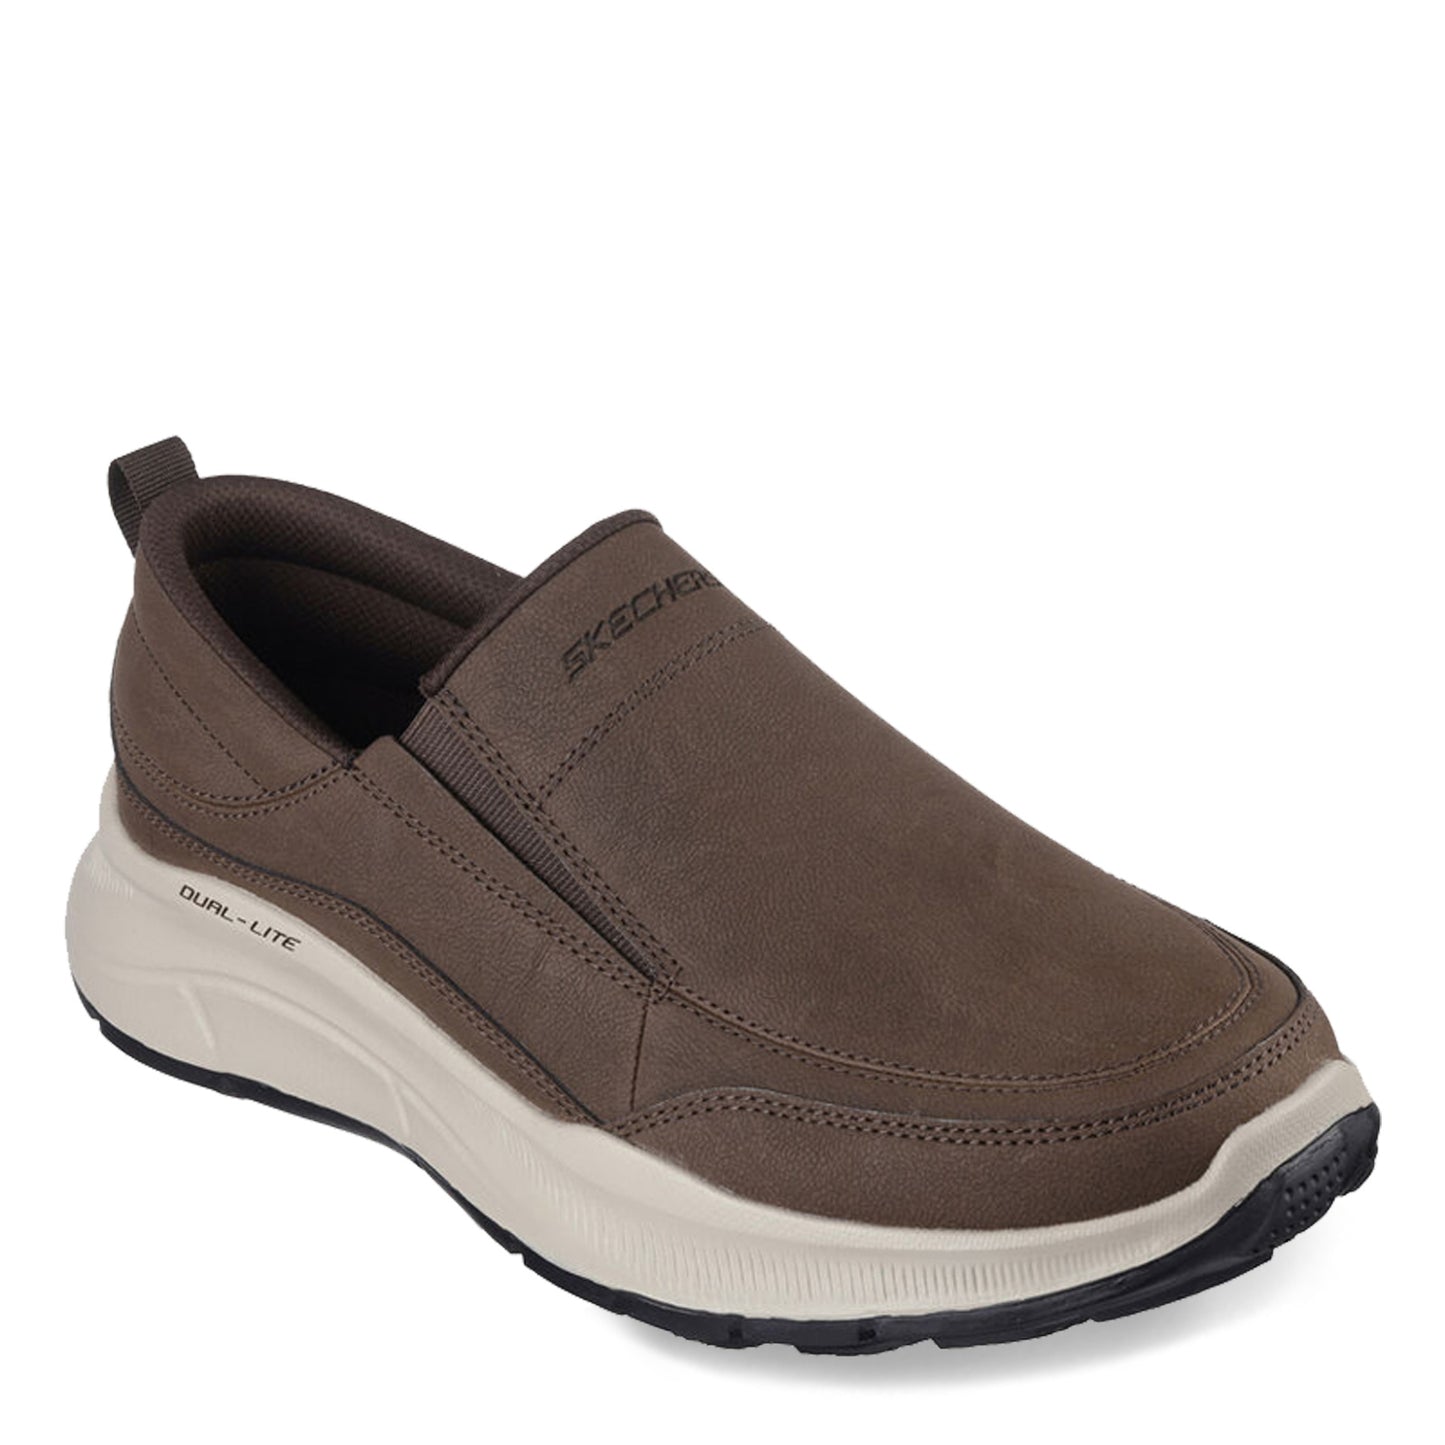 Peltz Shoes  Men's Skechers Relaxed Fit: Equalizer 5.0 – Harvey Sneaker Chocolate 232517-CHOC